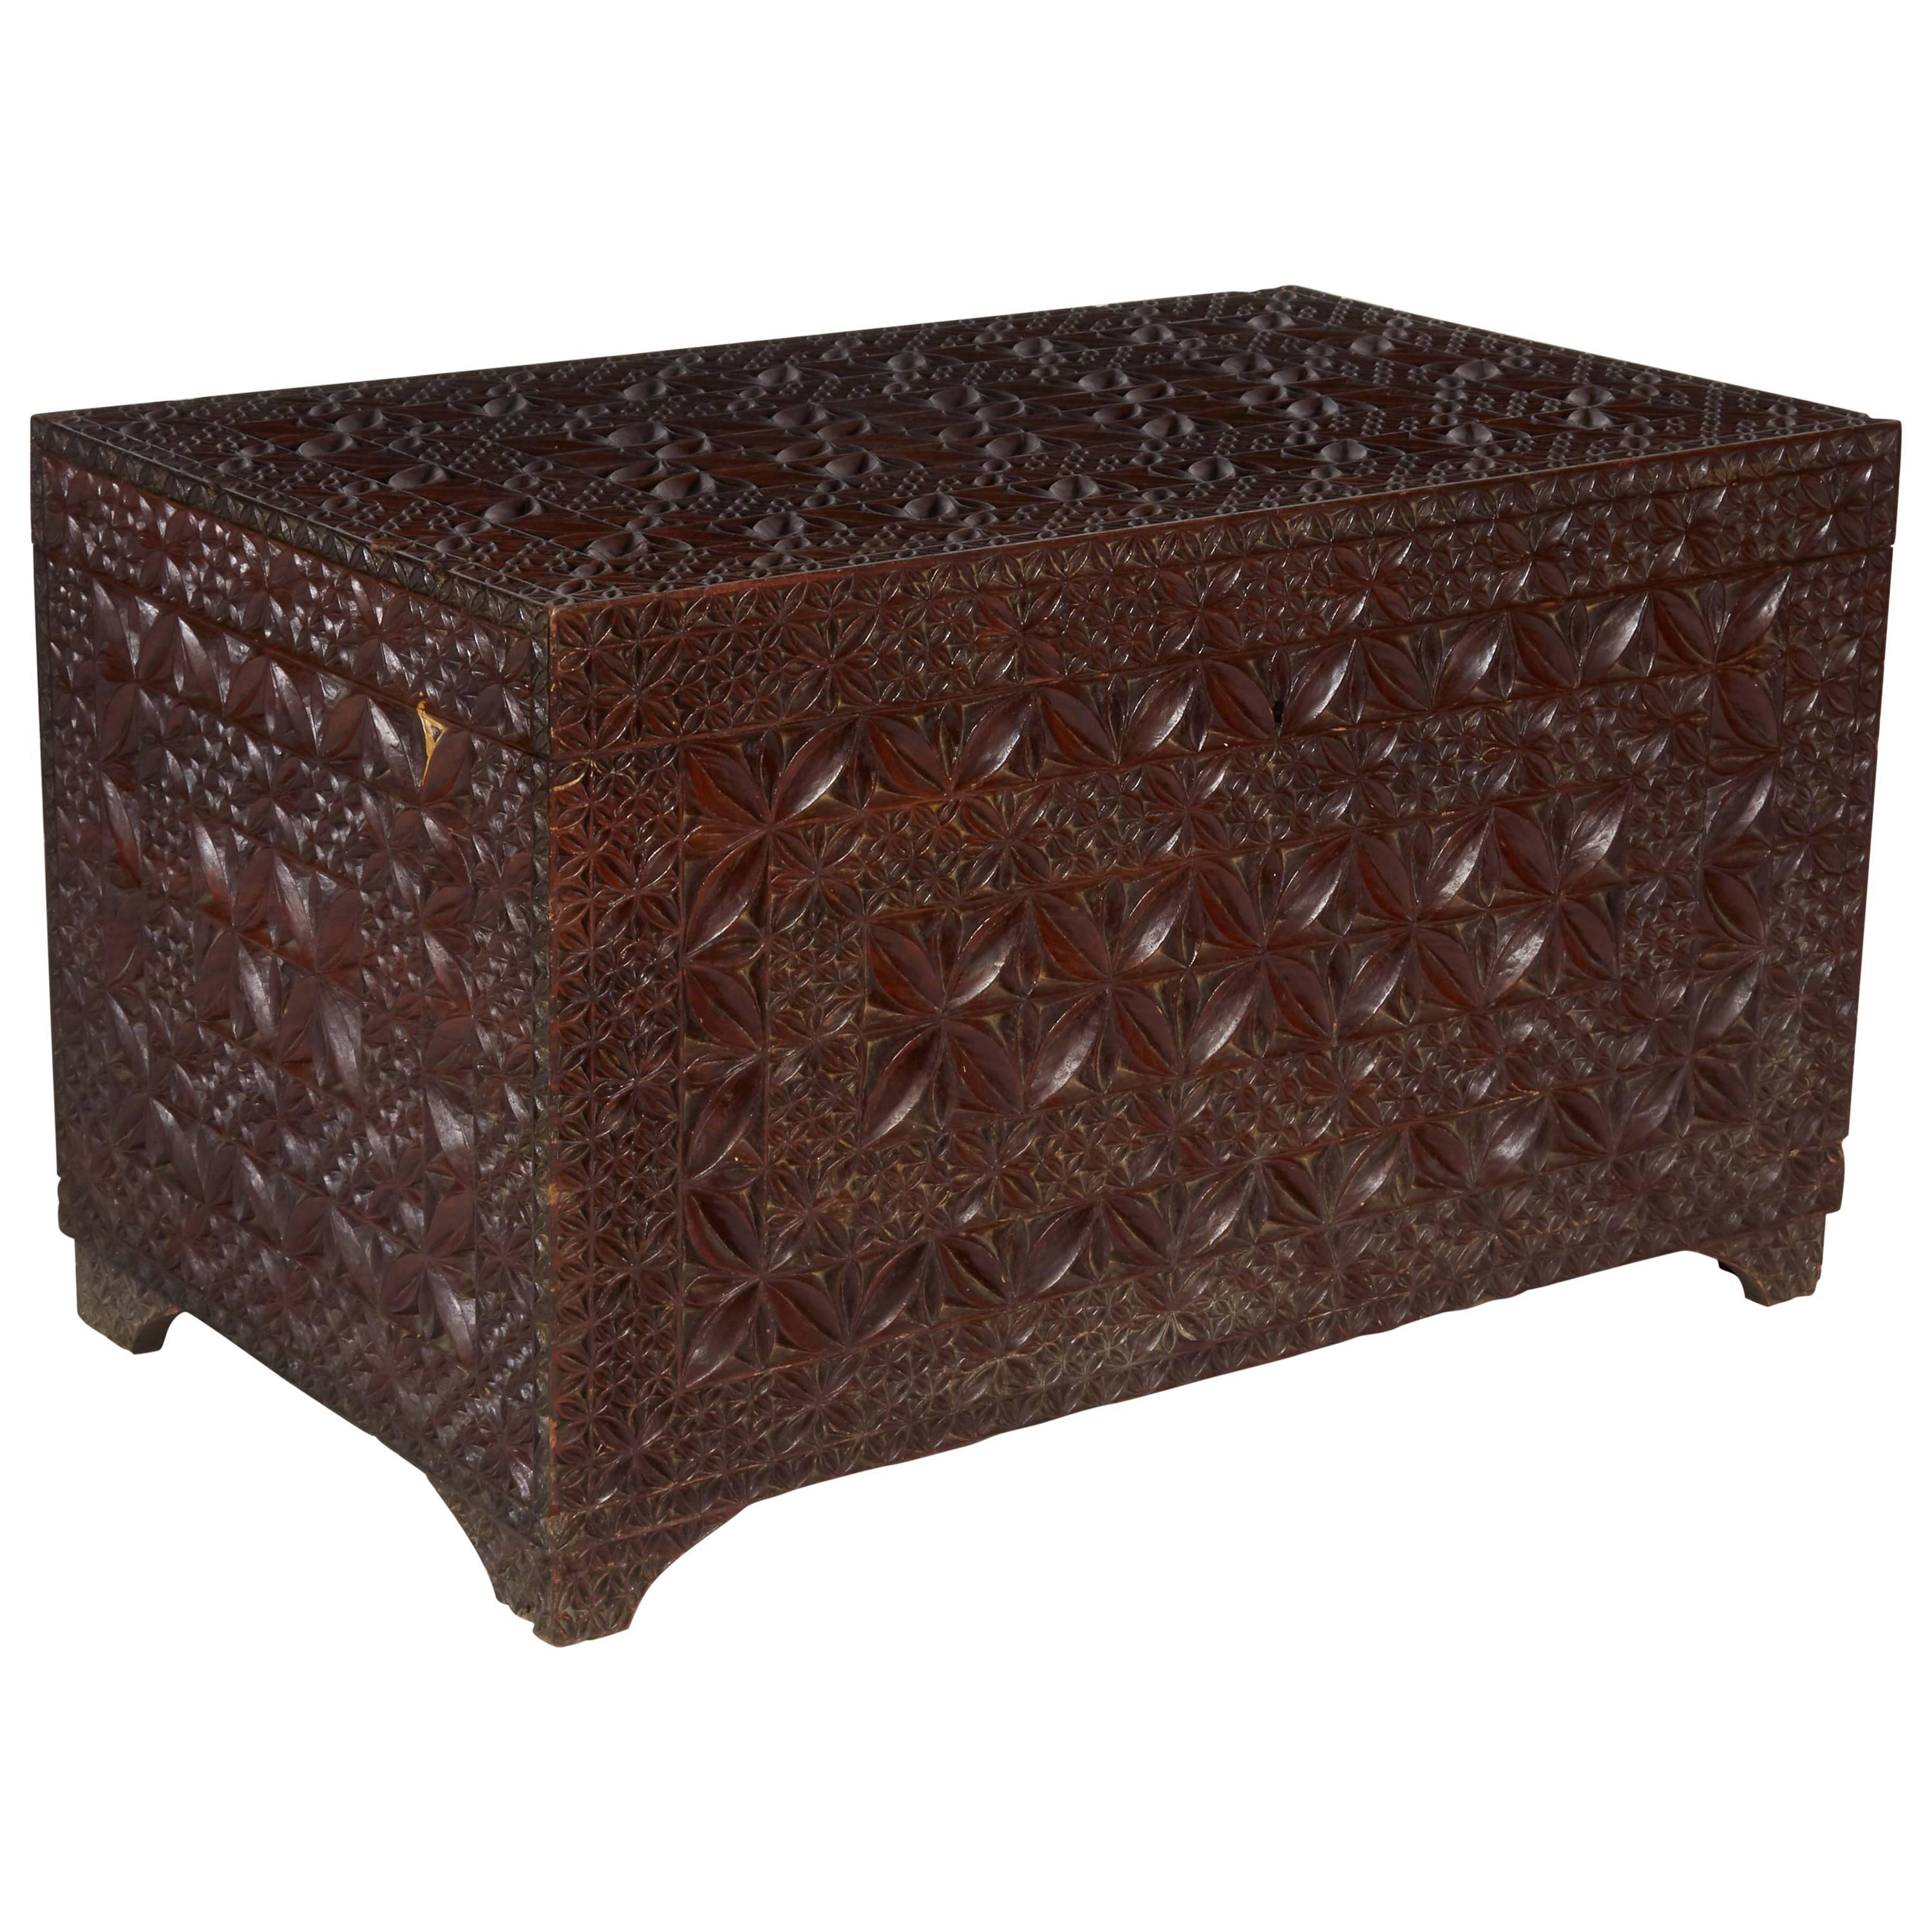 Ornate Carved Wood Trunk For Sale